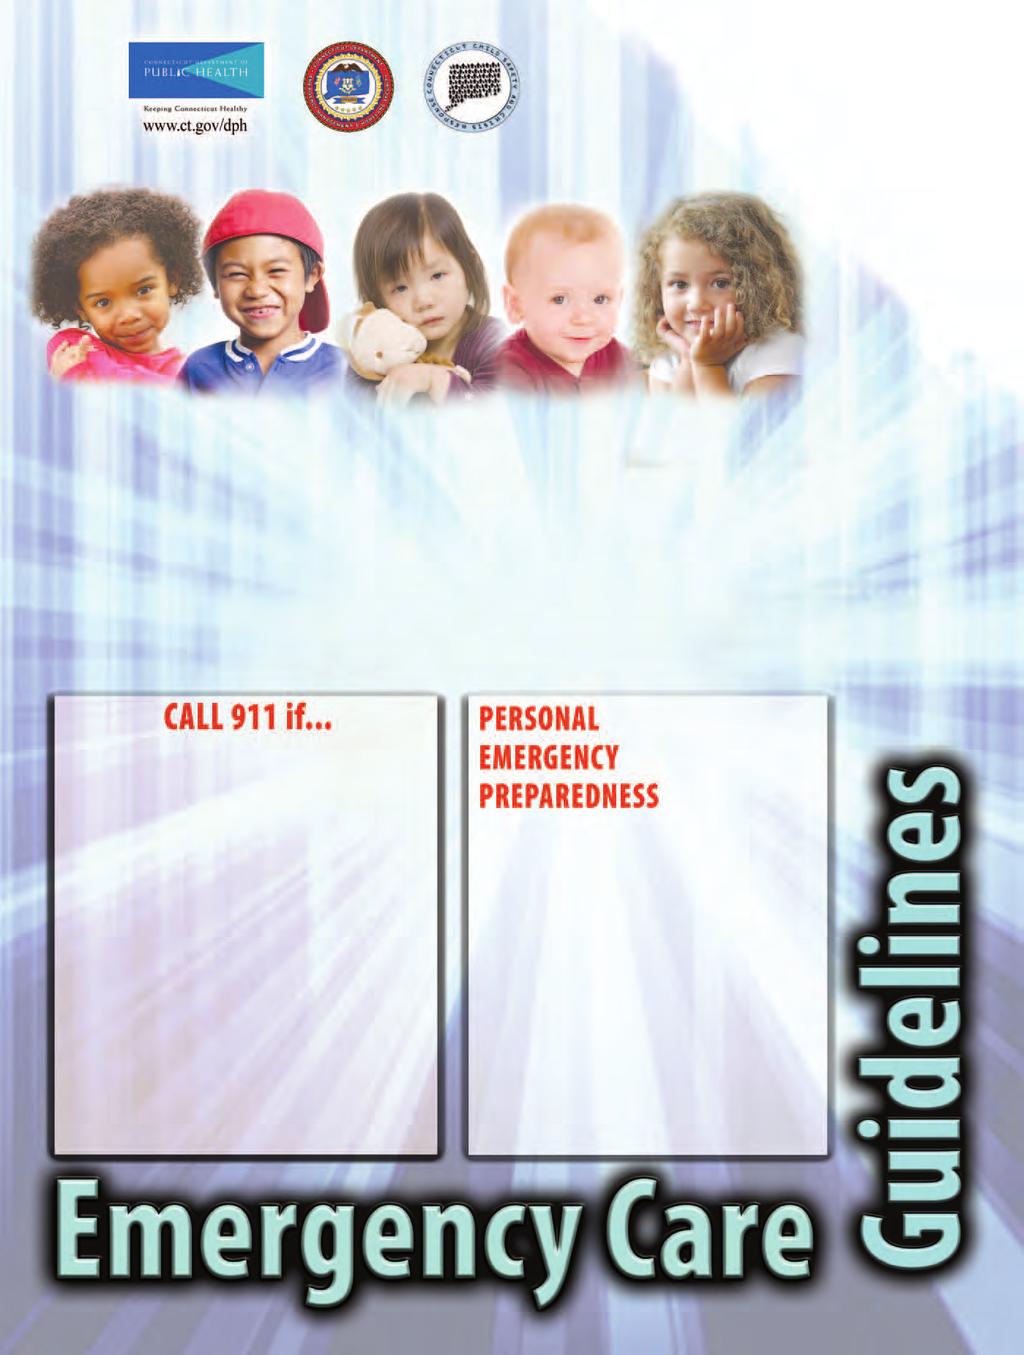 Emergency preparedness is especially important for child care providers because of the added responsibility of caring for the children of others.